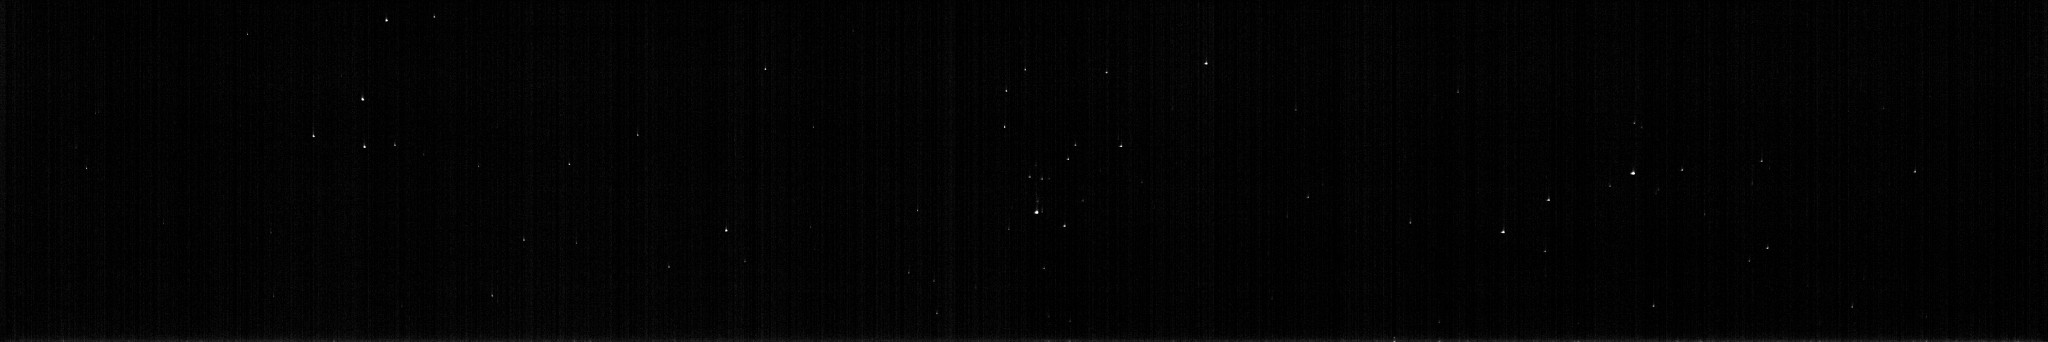 Panorama-like black-and-white image, mostly black with a smattering of dim white stars. of stars